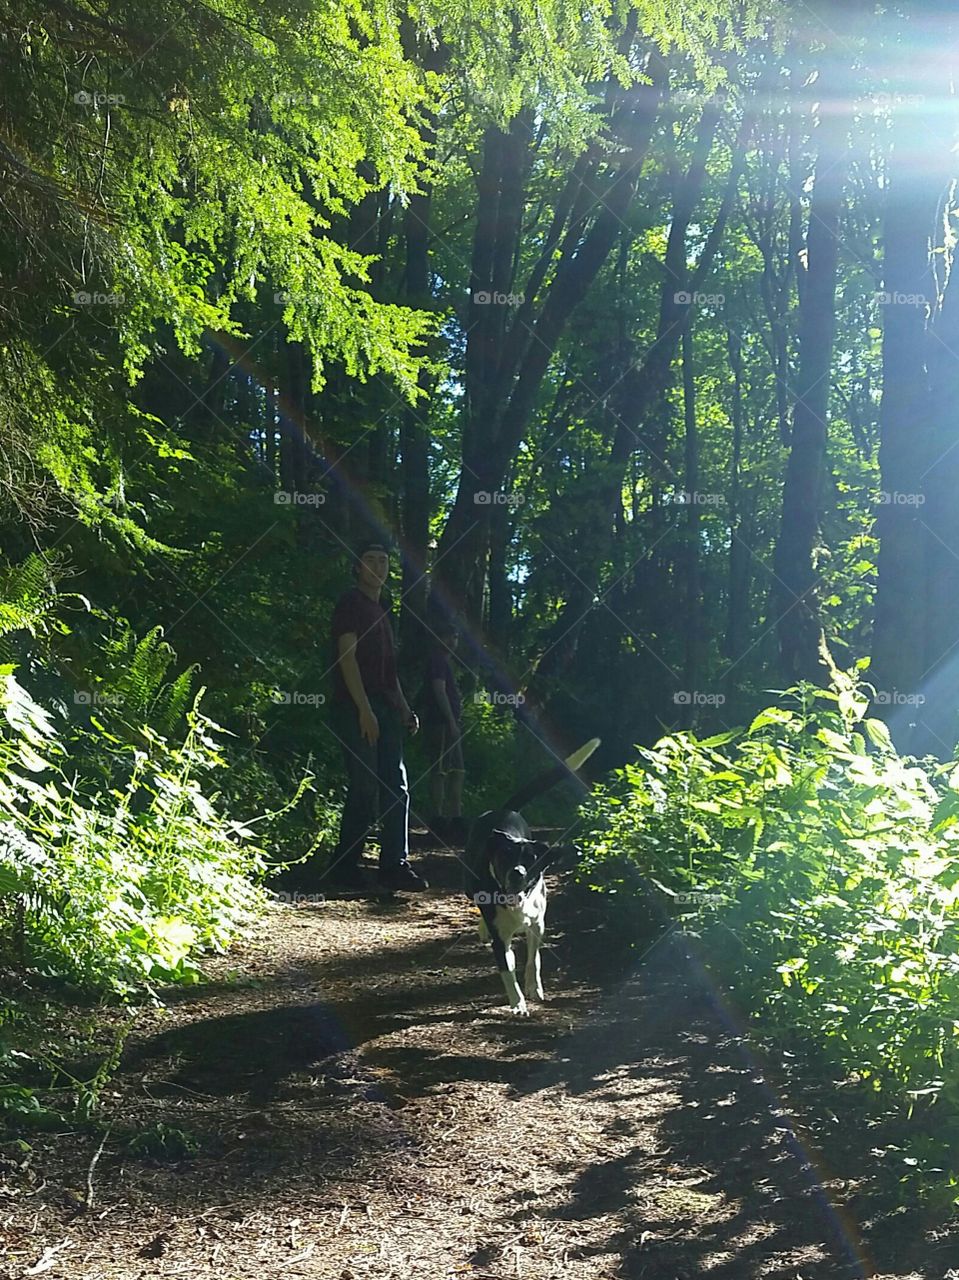 Pacific Northwest in June. Sun shining and happy doge.